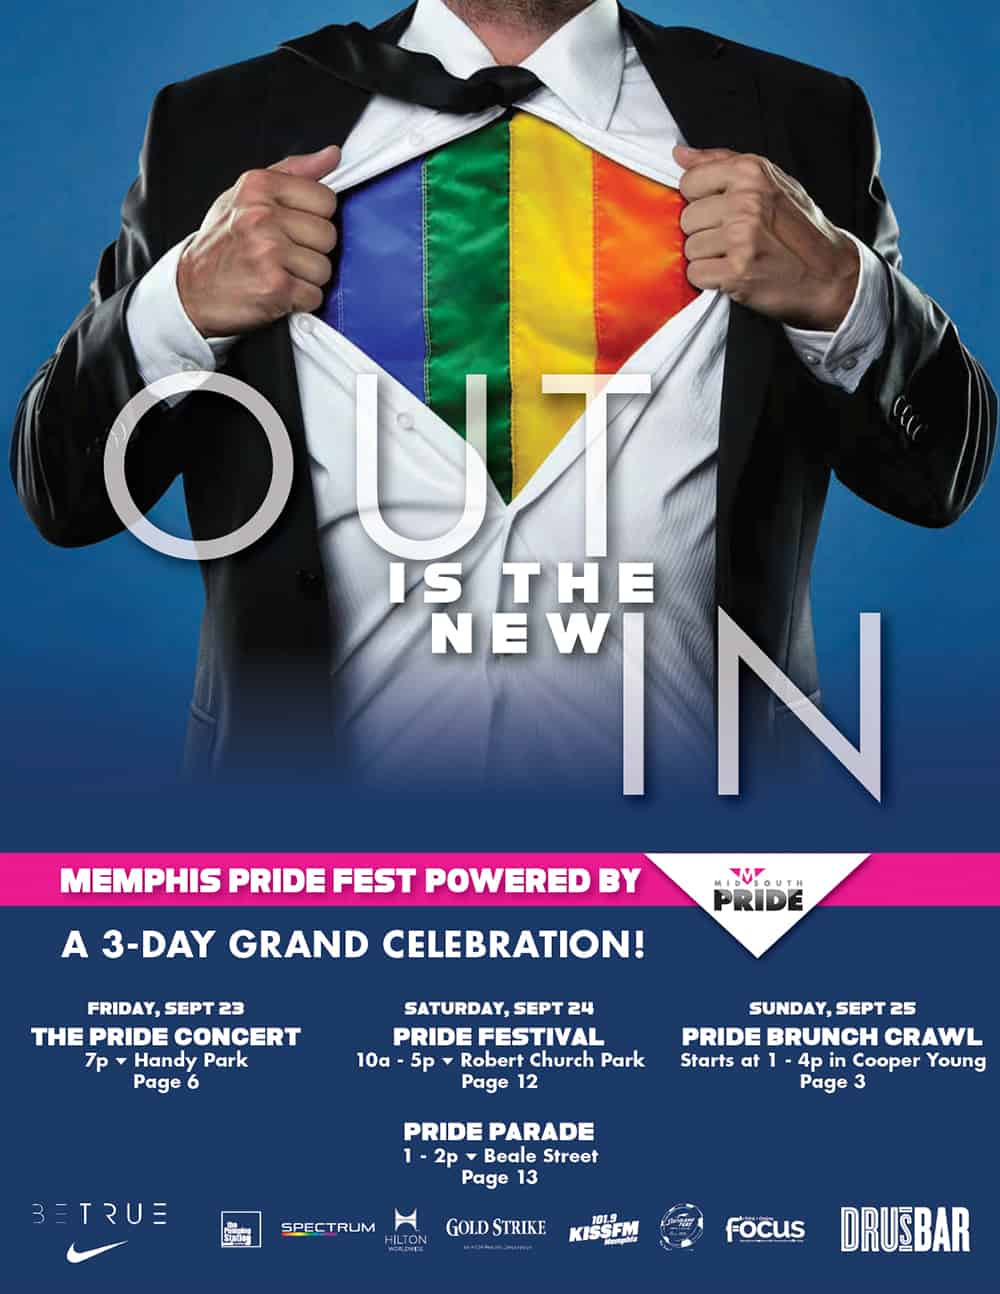 Cover of the Memphis Pride Guide 2016